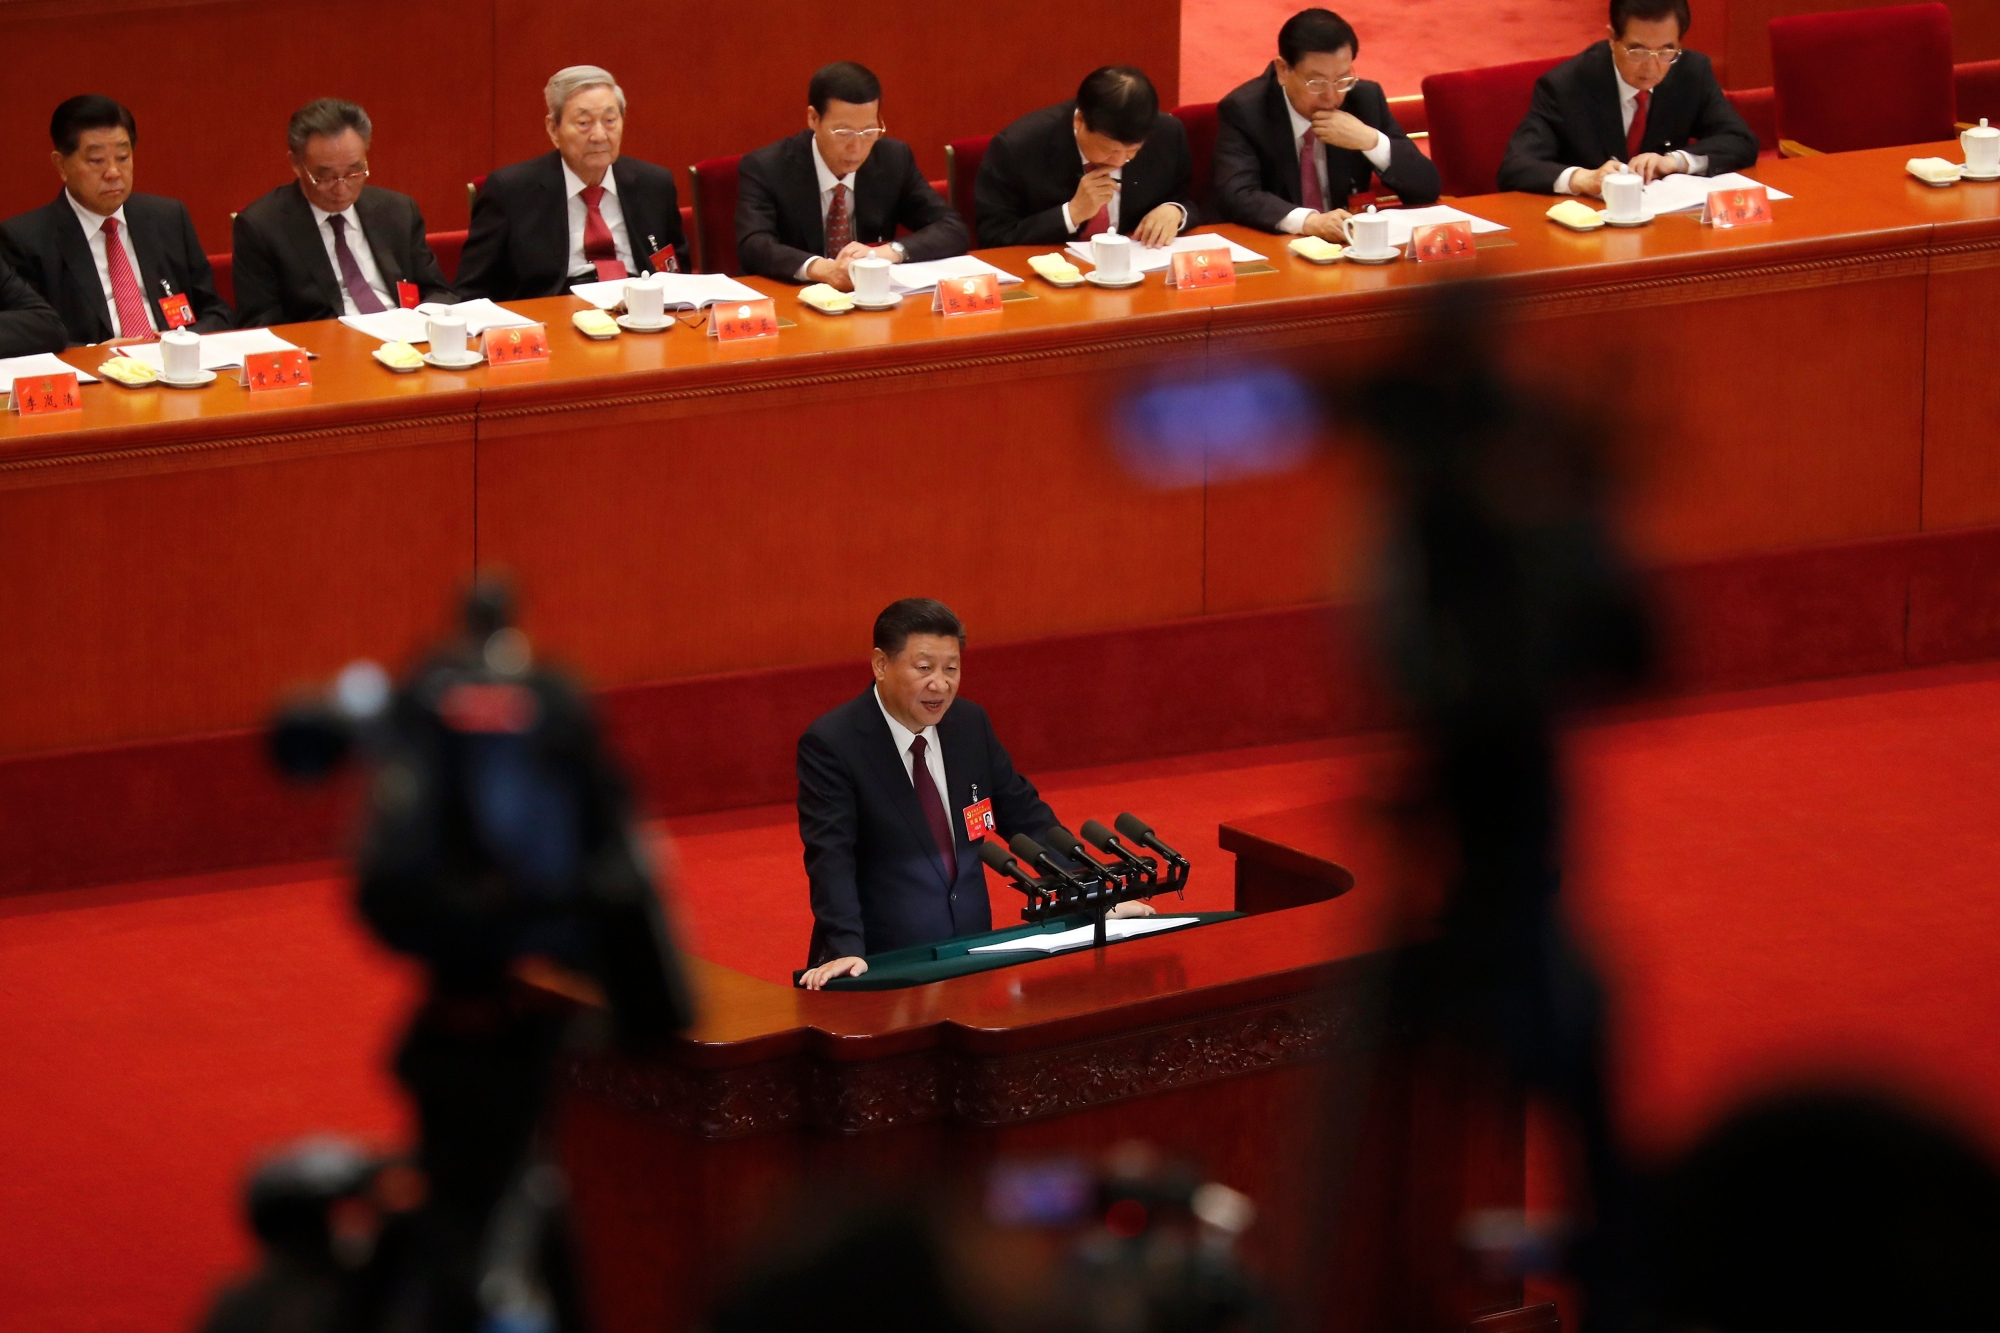 Chinese President Xi Jinping delivers a speech at the opening ceremony of the 19th Party Congress at the Great Hall of the People in Beijing, Wednesday, Oct. 18, 2017. Xi on Wednesday urged a reinvigorated Communist Party to take on a more forceful role in society and economic development to better address "grim" challenges facing the country as he opened a twice-a-decade national congress. (AP Photo/Andy Wong) APTOPIX China Party Congress